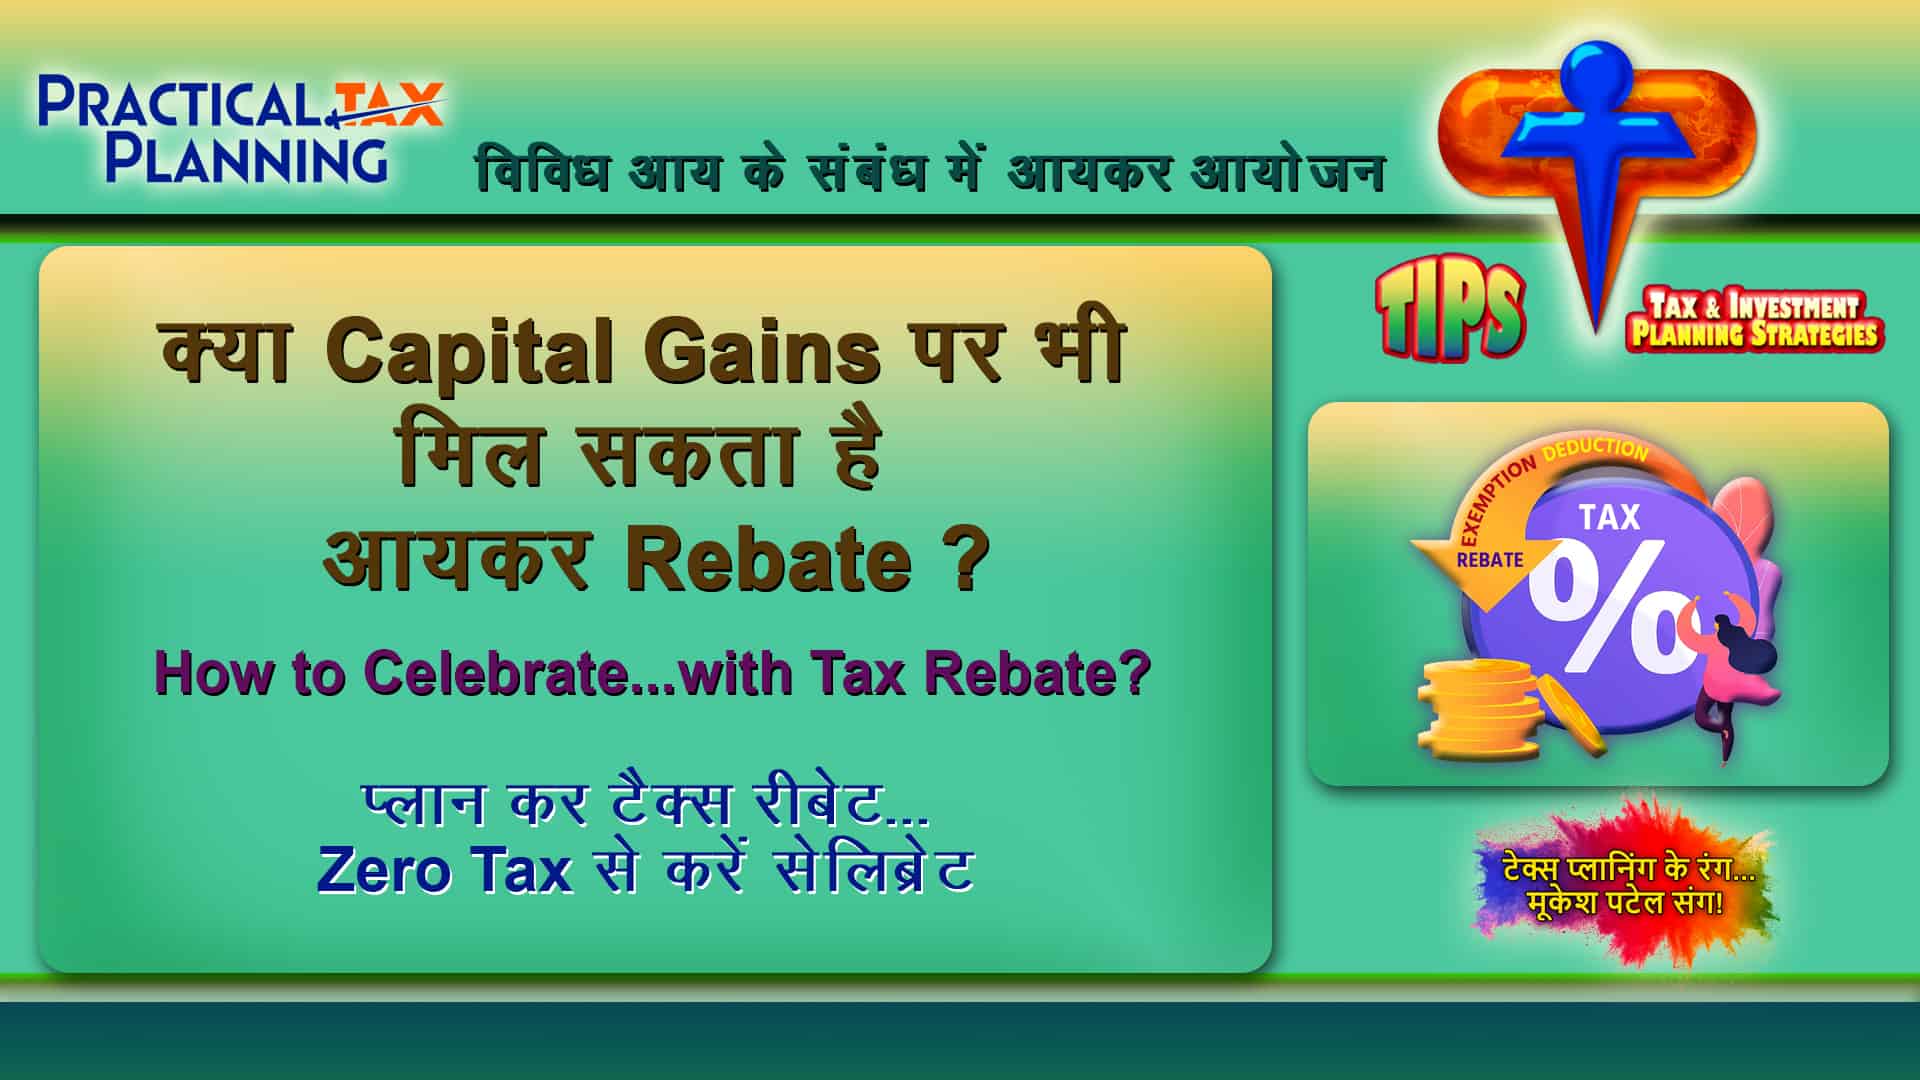 capital-gains-tax-eligible-for-tax-rebate-set-off-celebrate-with-tax